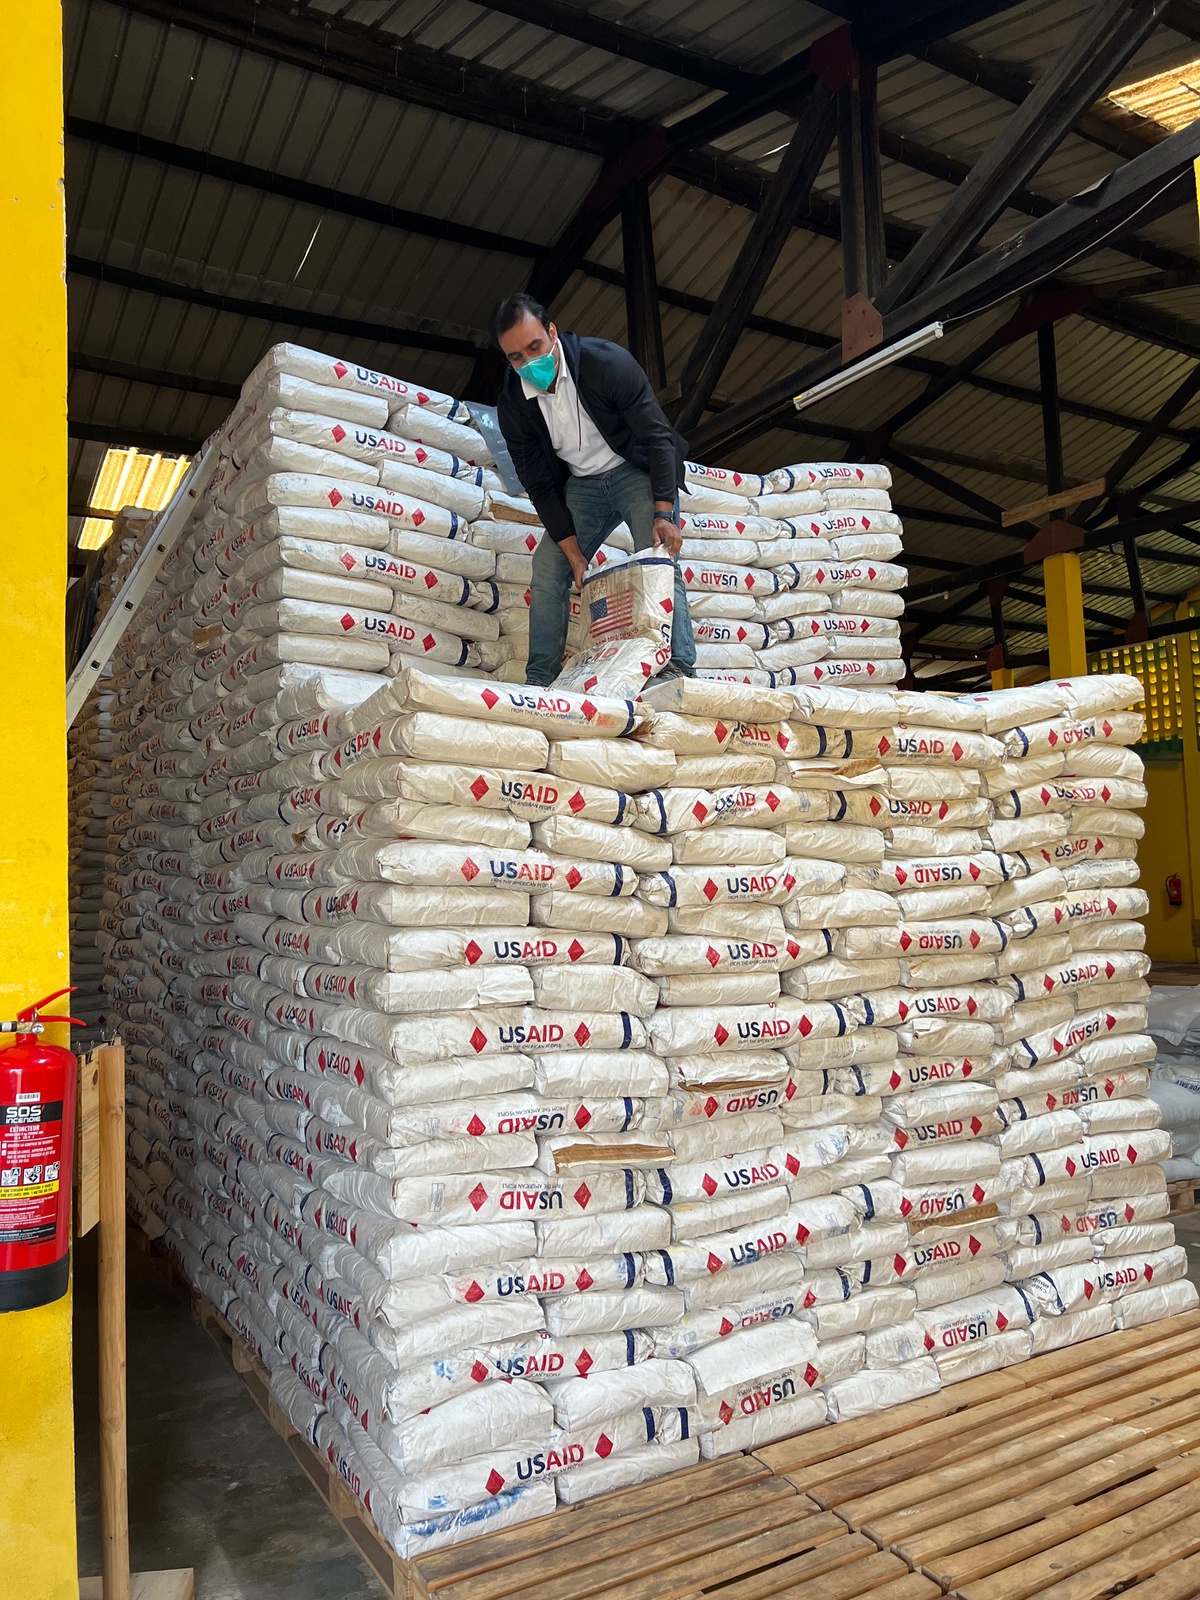 Fahim standing on top of and stacking bags of grain with USAID logo